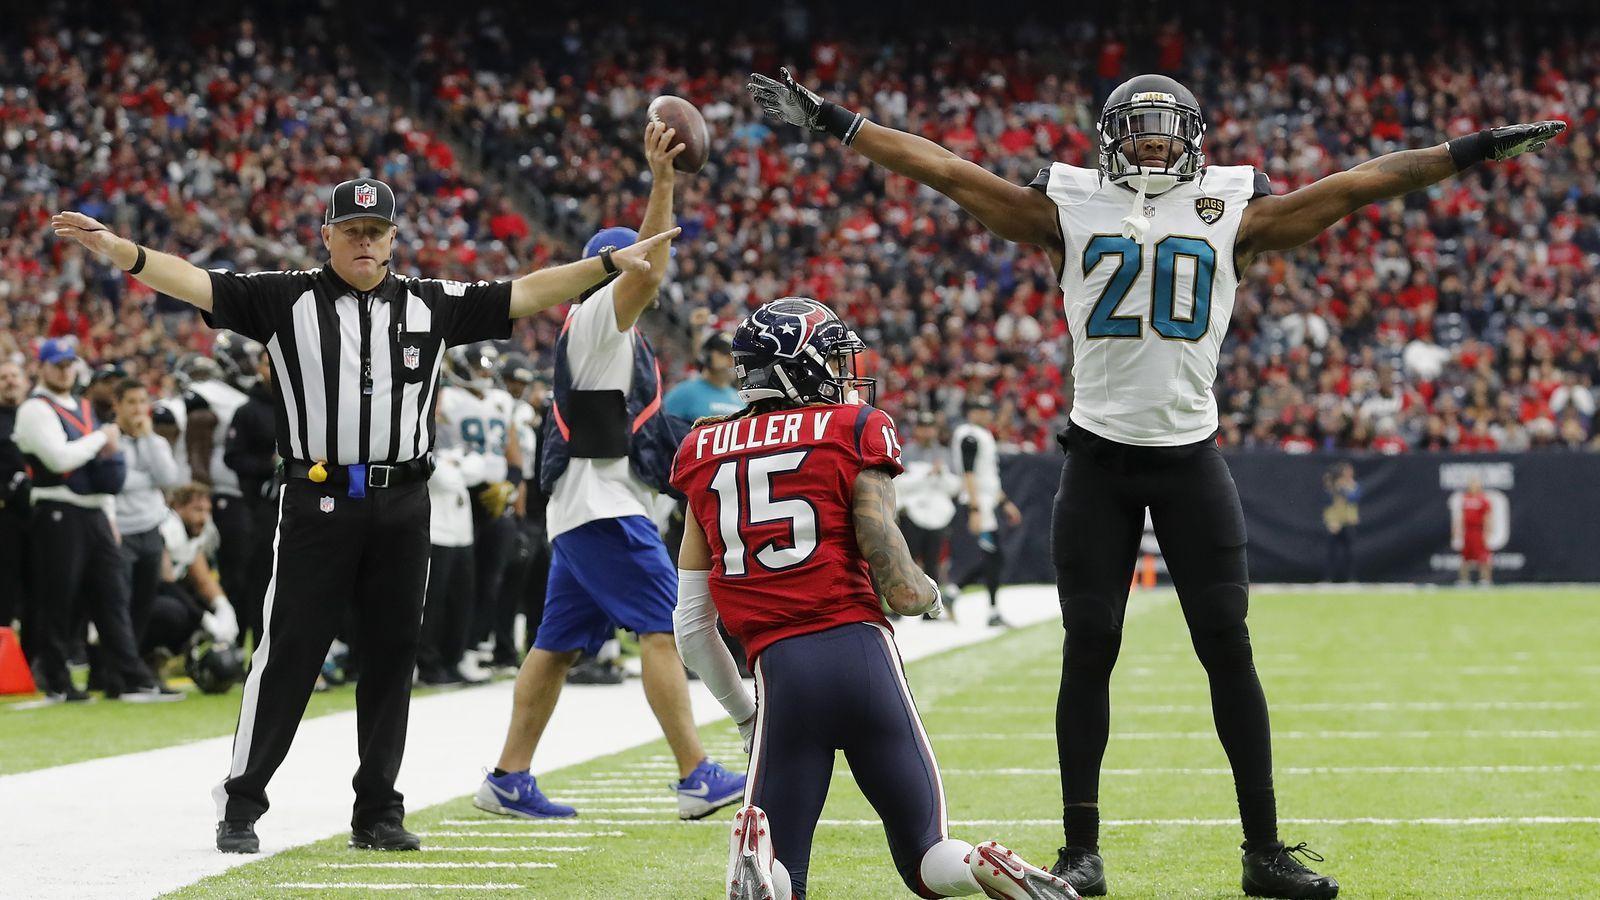 NFL.com: Jalen Ramsey and A.J. Bouye are the top cornerback tandem